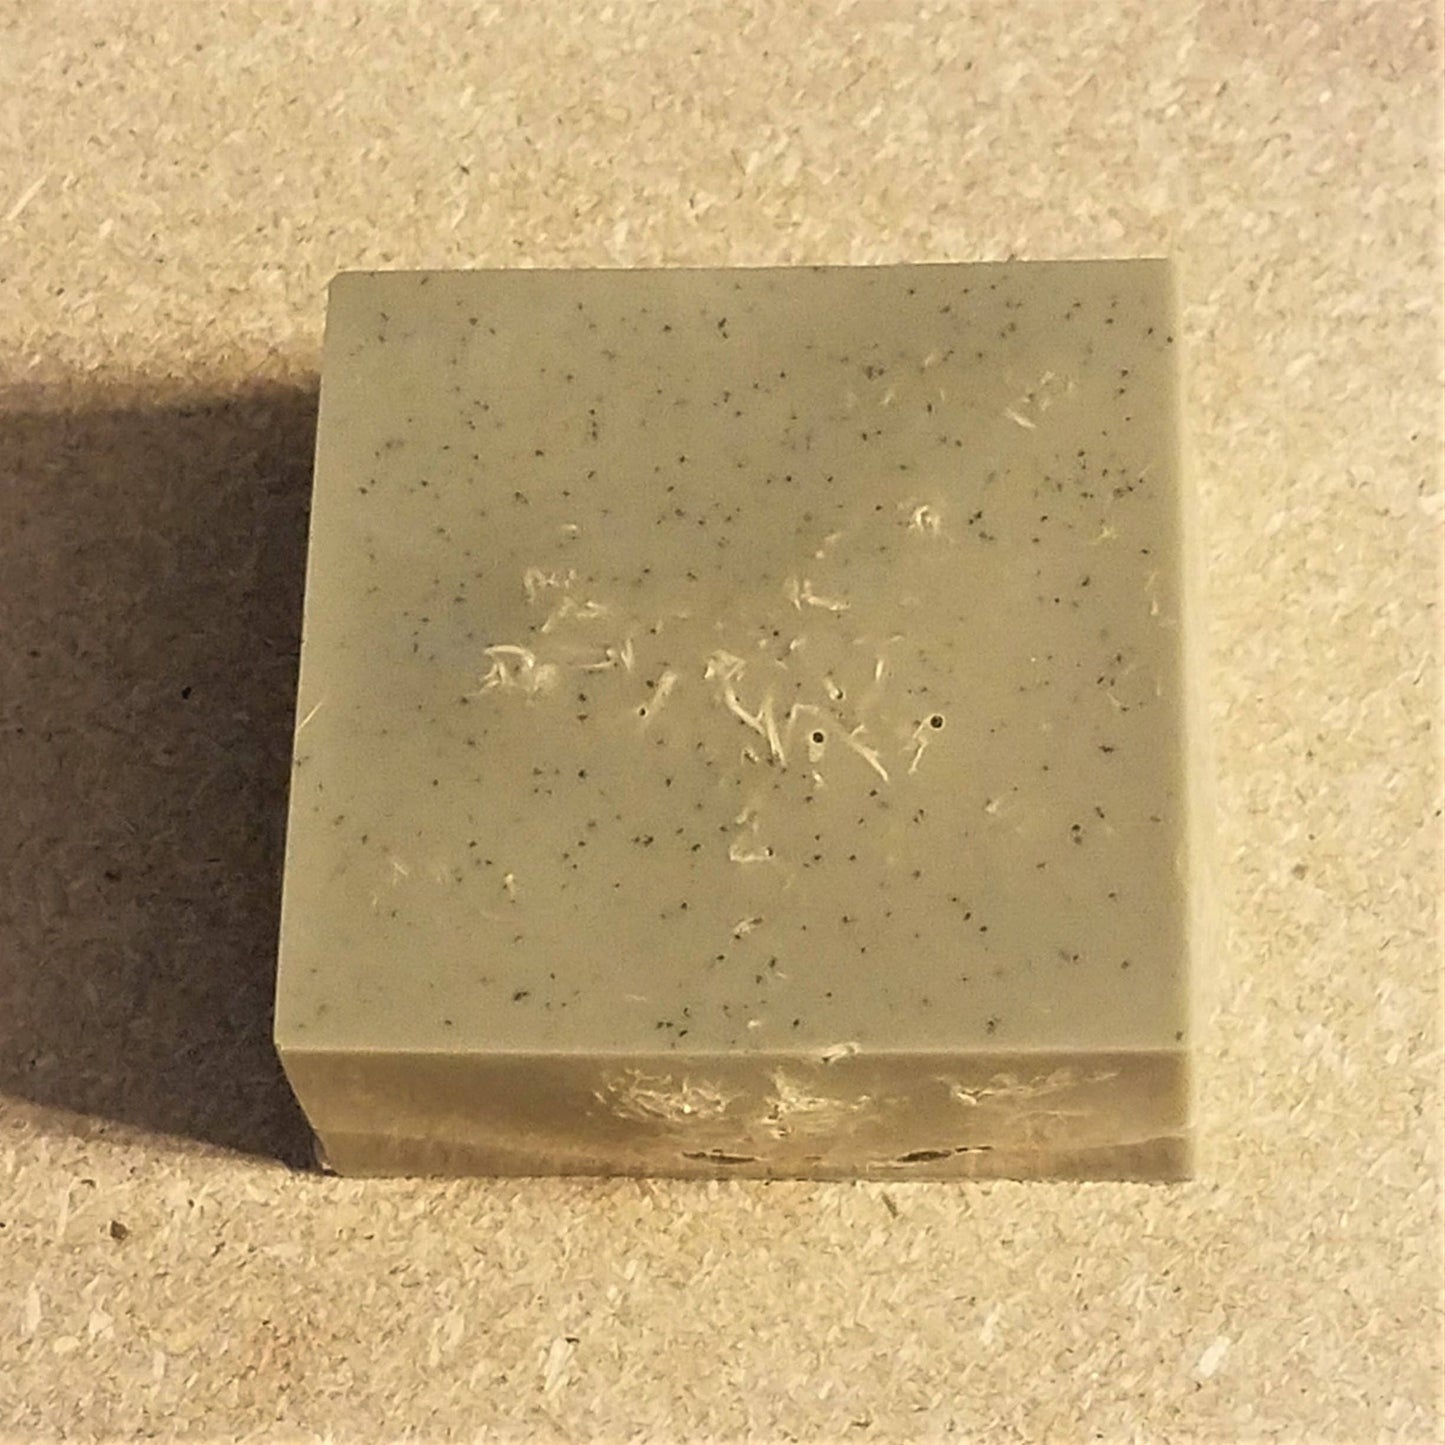 Ivy Creek Peppermint & Tea Tree Loofah Foot Scrub Soap with French Green Clay - 4.9 oz